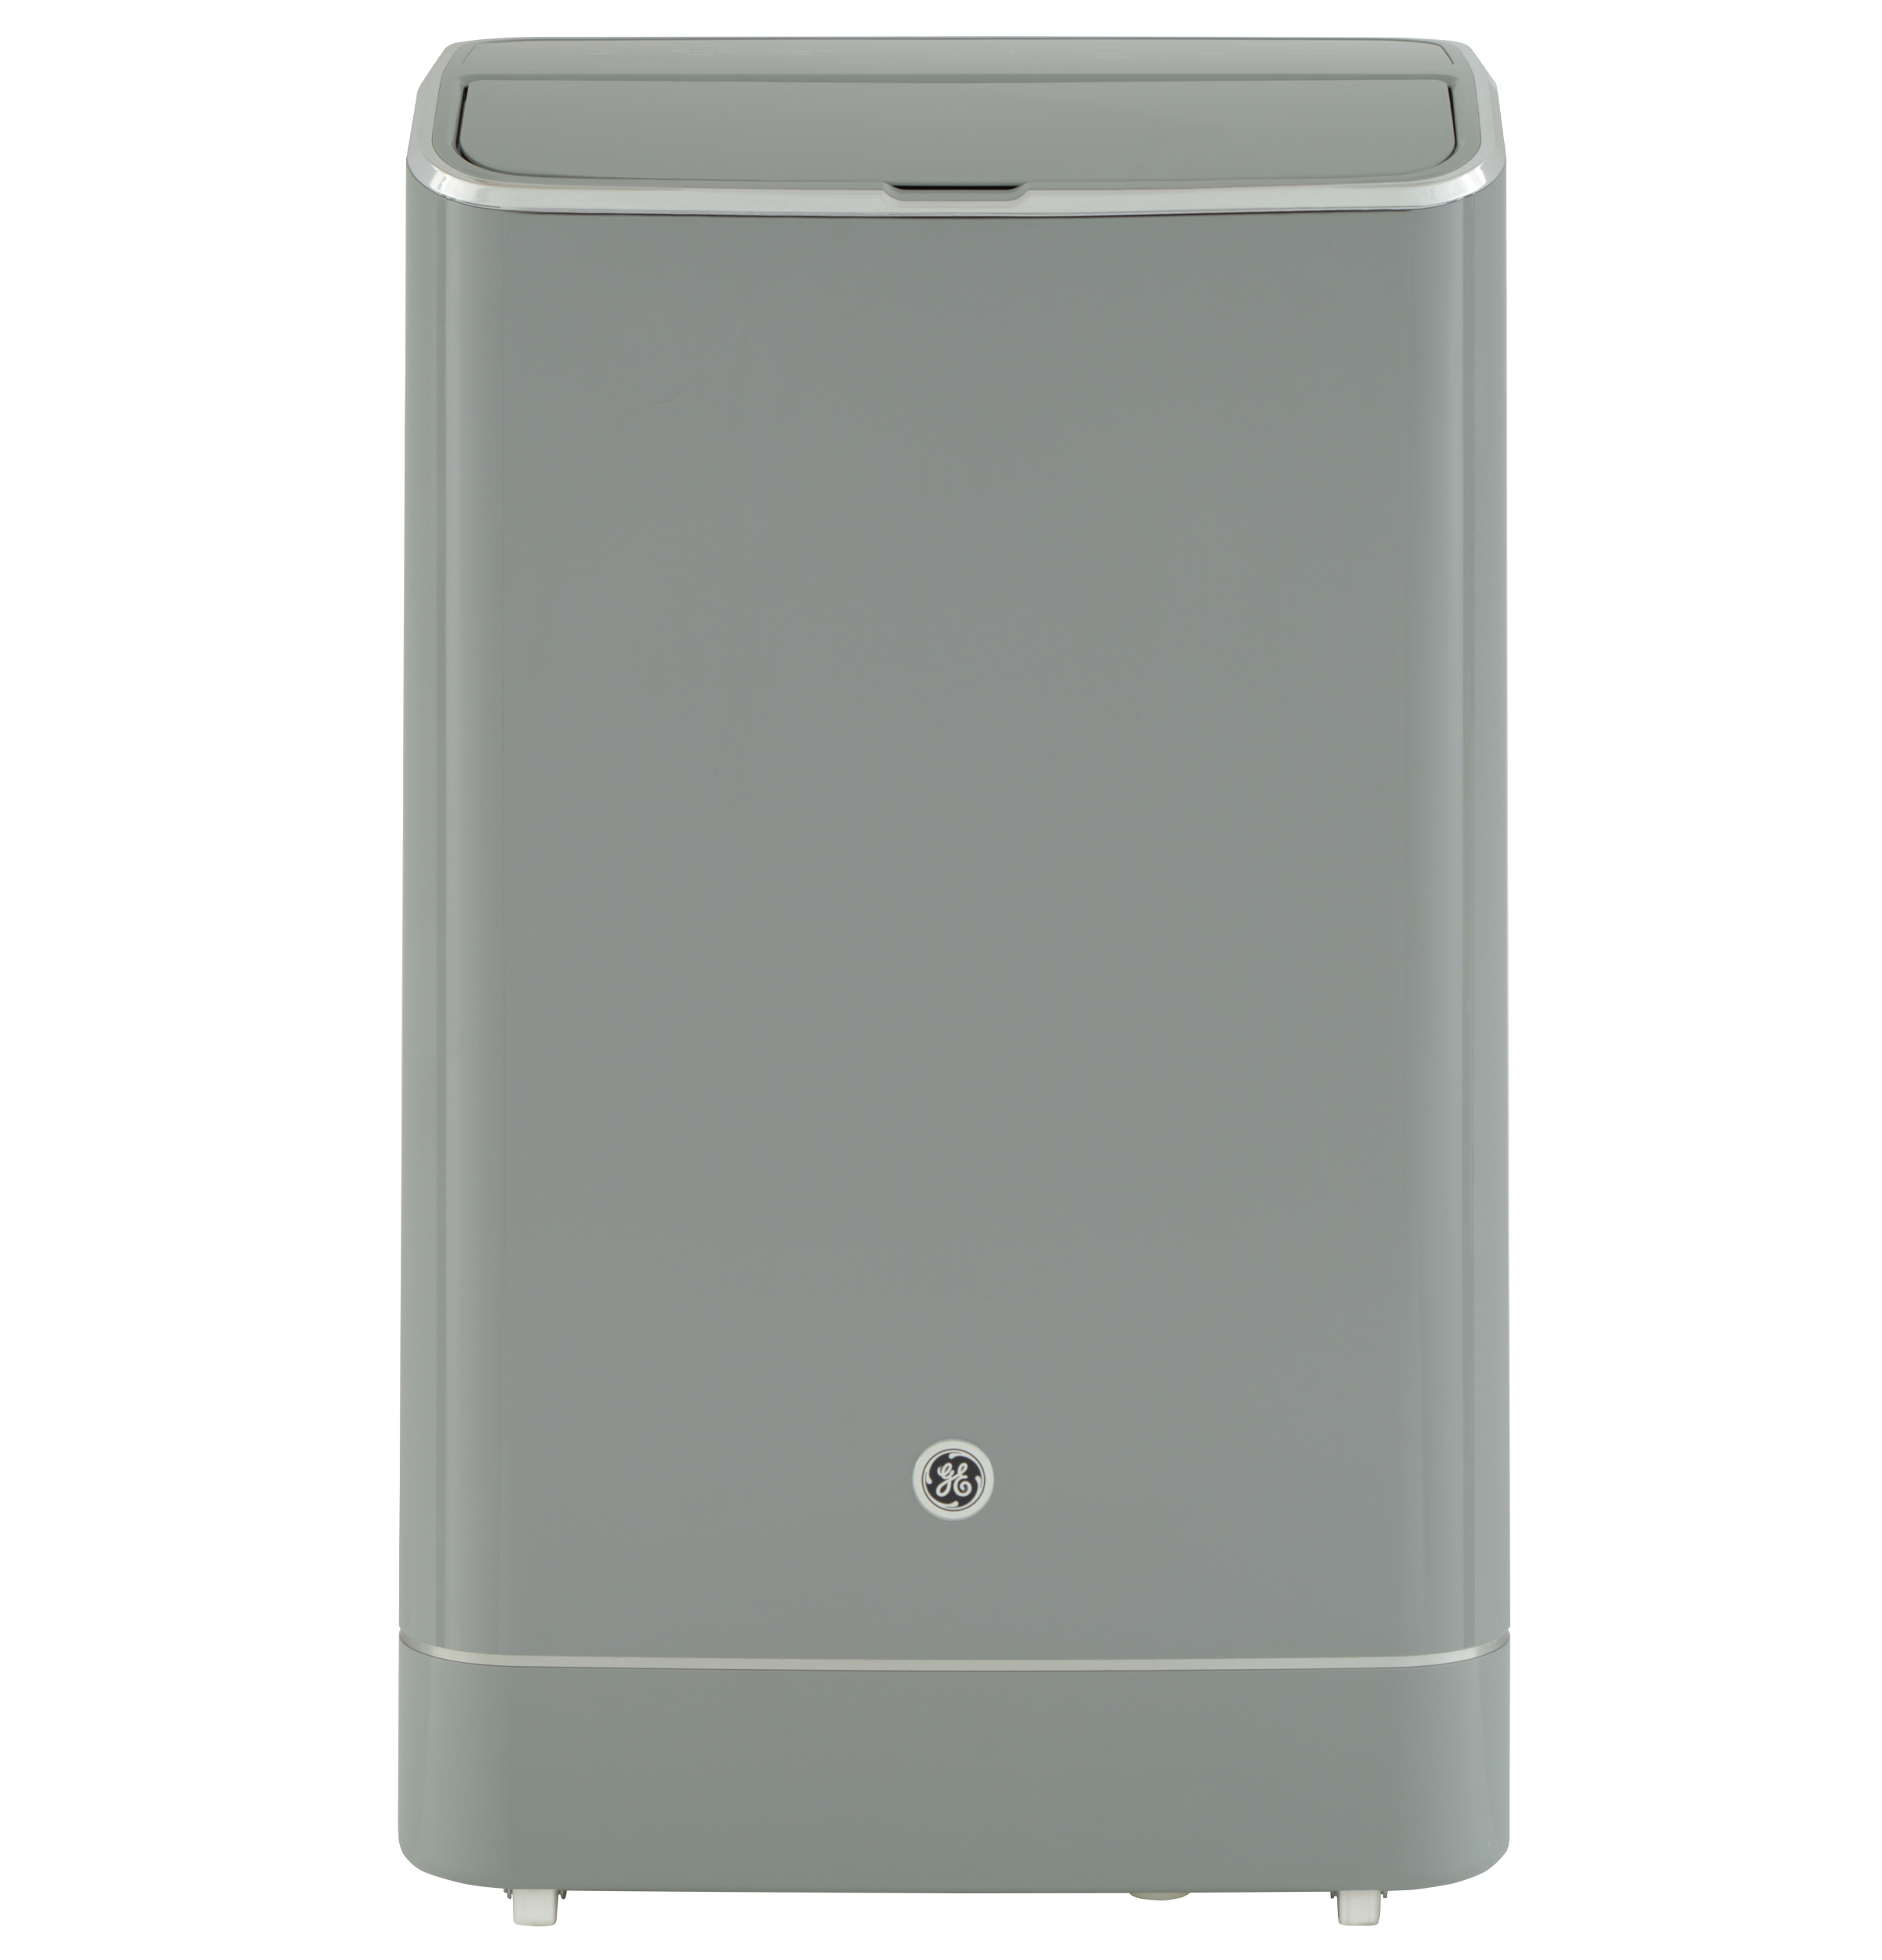 GE® 10,000 BTU Smart Portable Air Conditioner for Medium Rooms up to 450 sq ft.